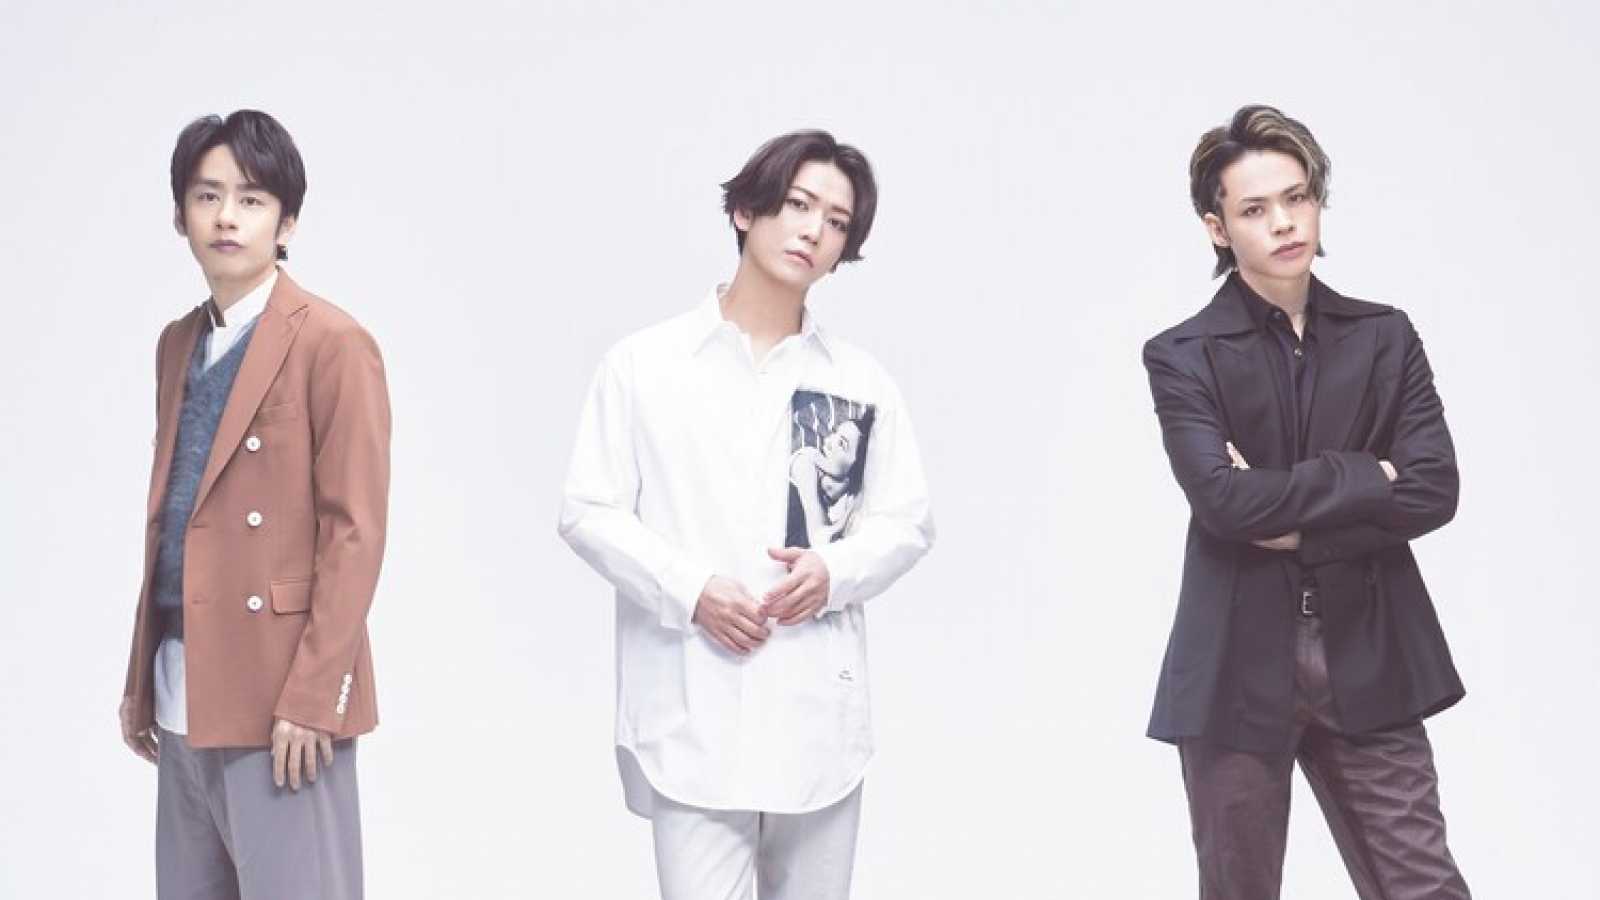 New Album from KAT-TUN © KAT-TUN. All rights reserved.